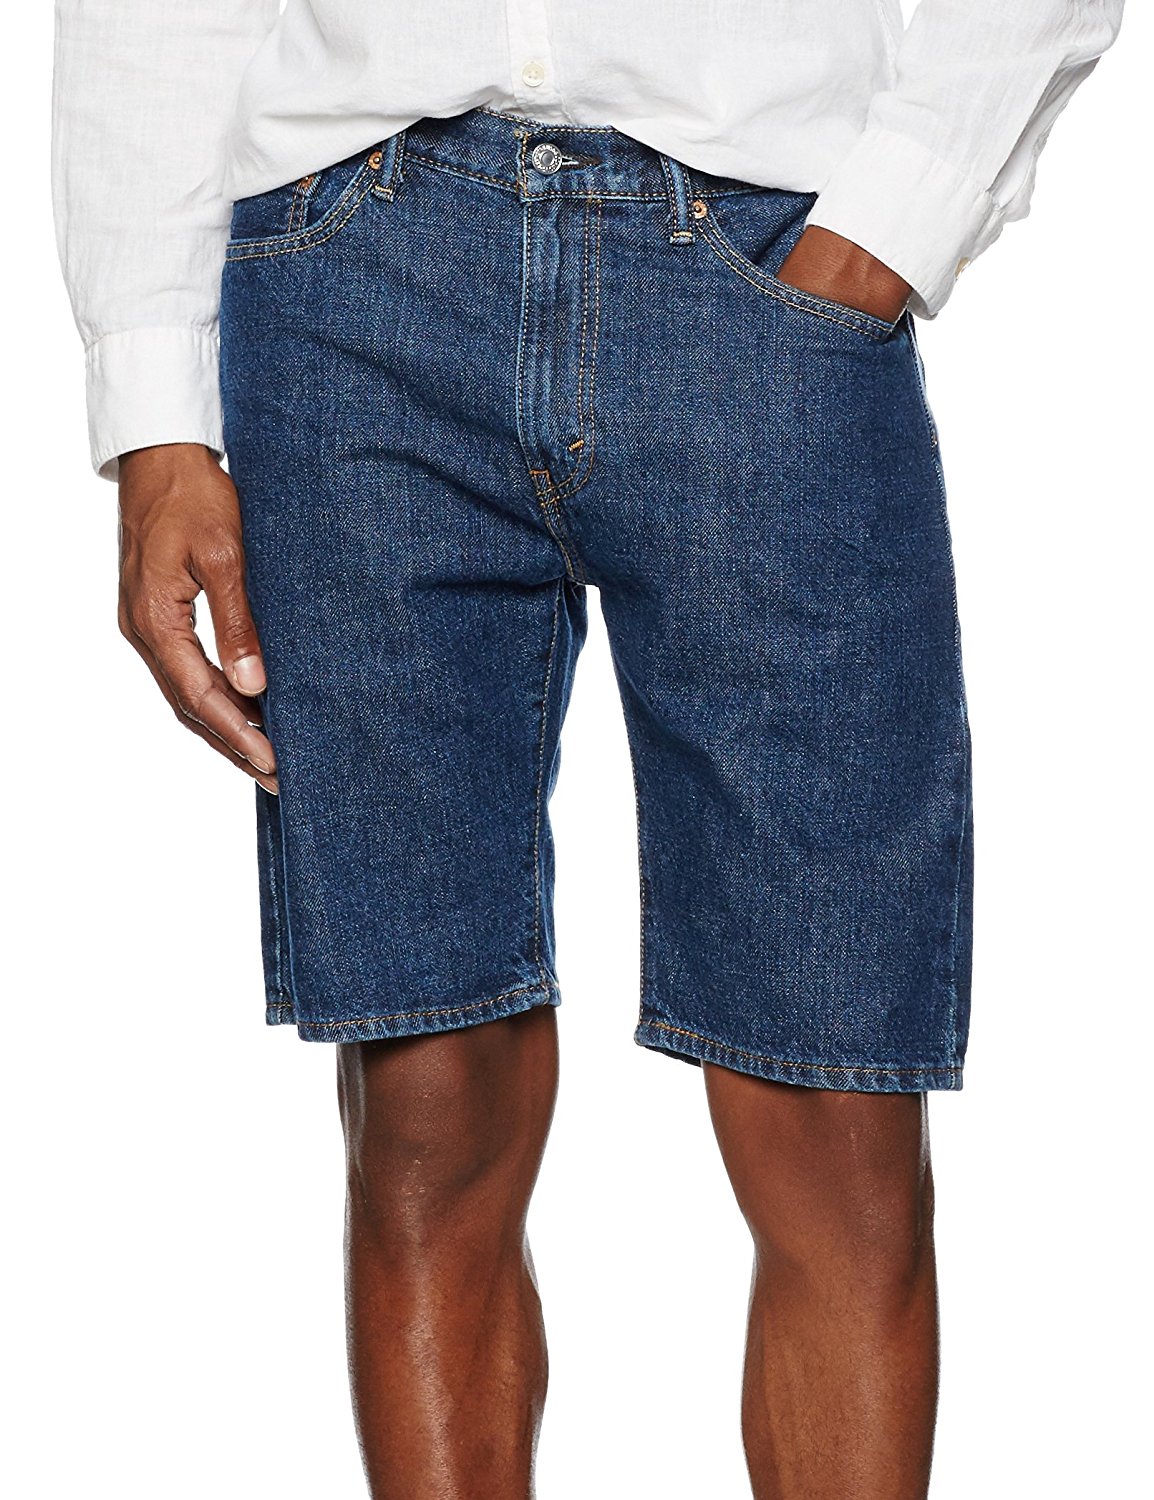 Levis shorts men, a globally renowned denim brand, has been a symbol of quality, style, and innovation for over a century.